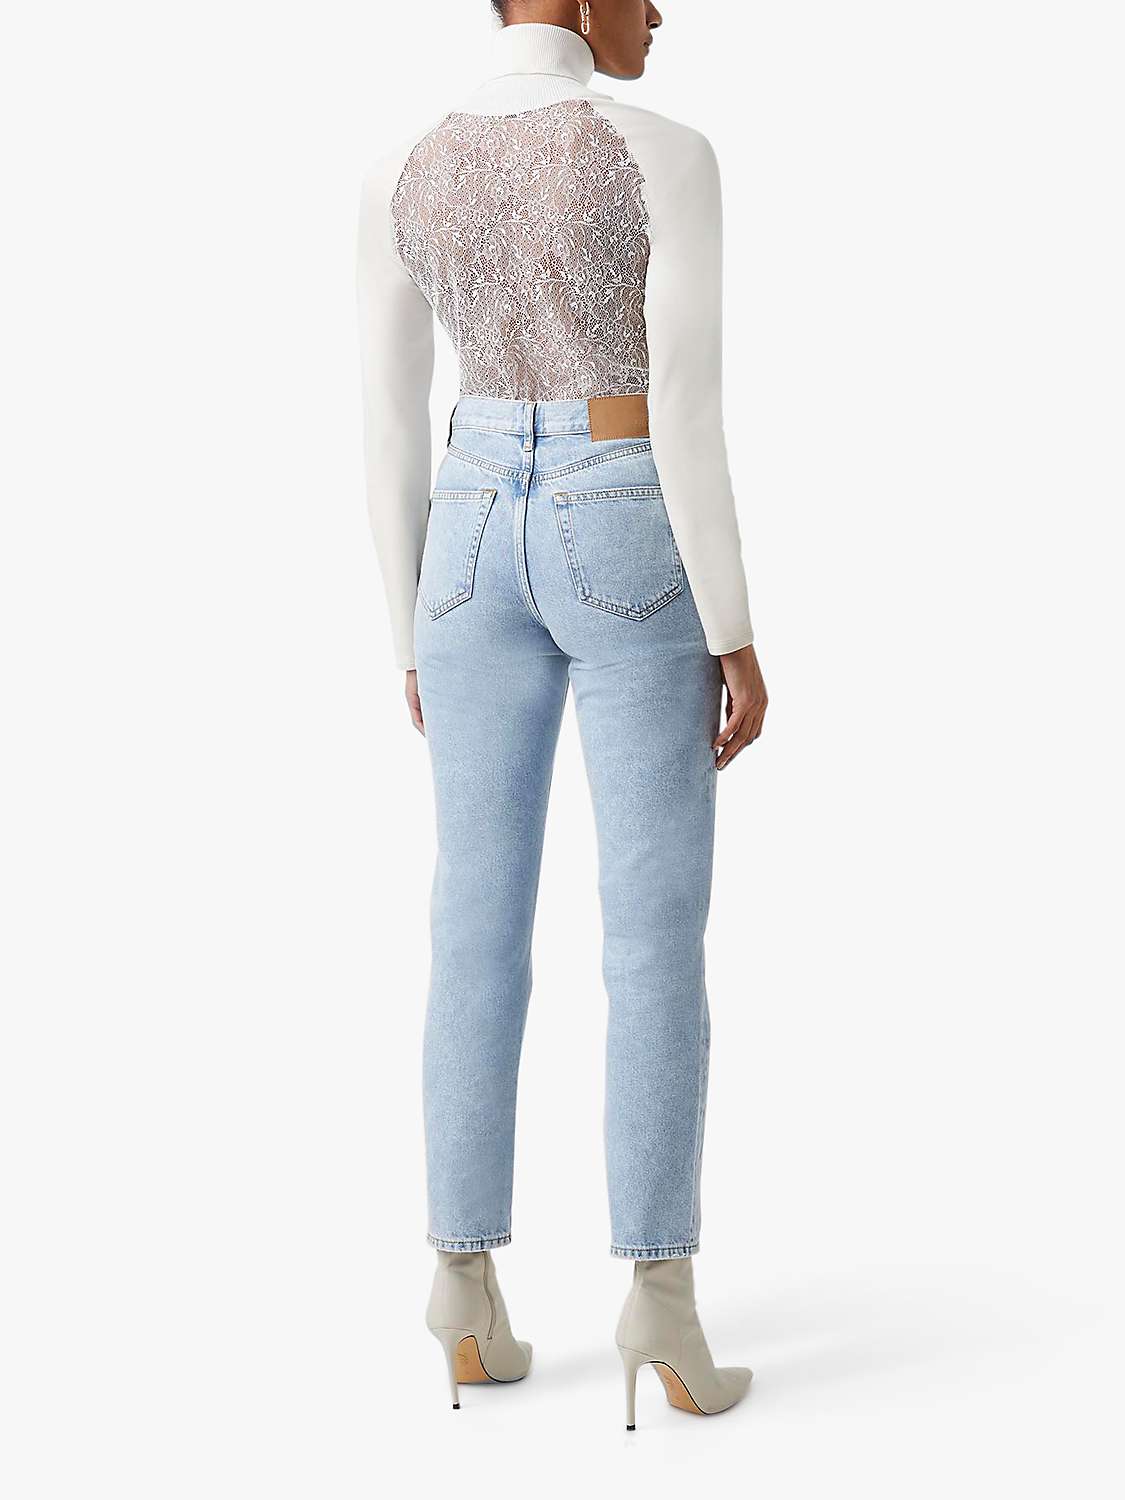 Buy French Connection Sonita Lace Back Top, Classic Cream Online at johnlewis.com